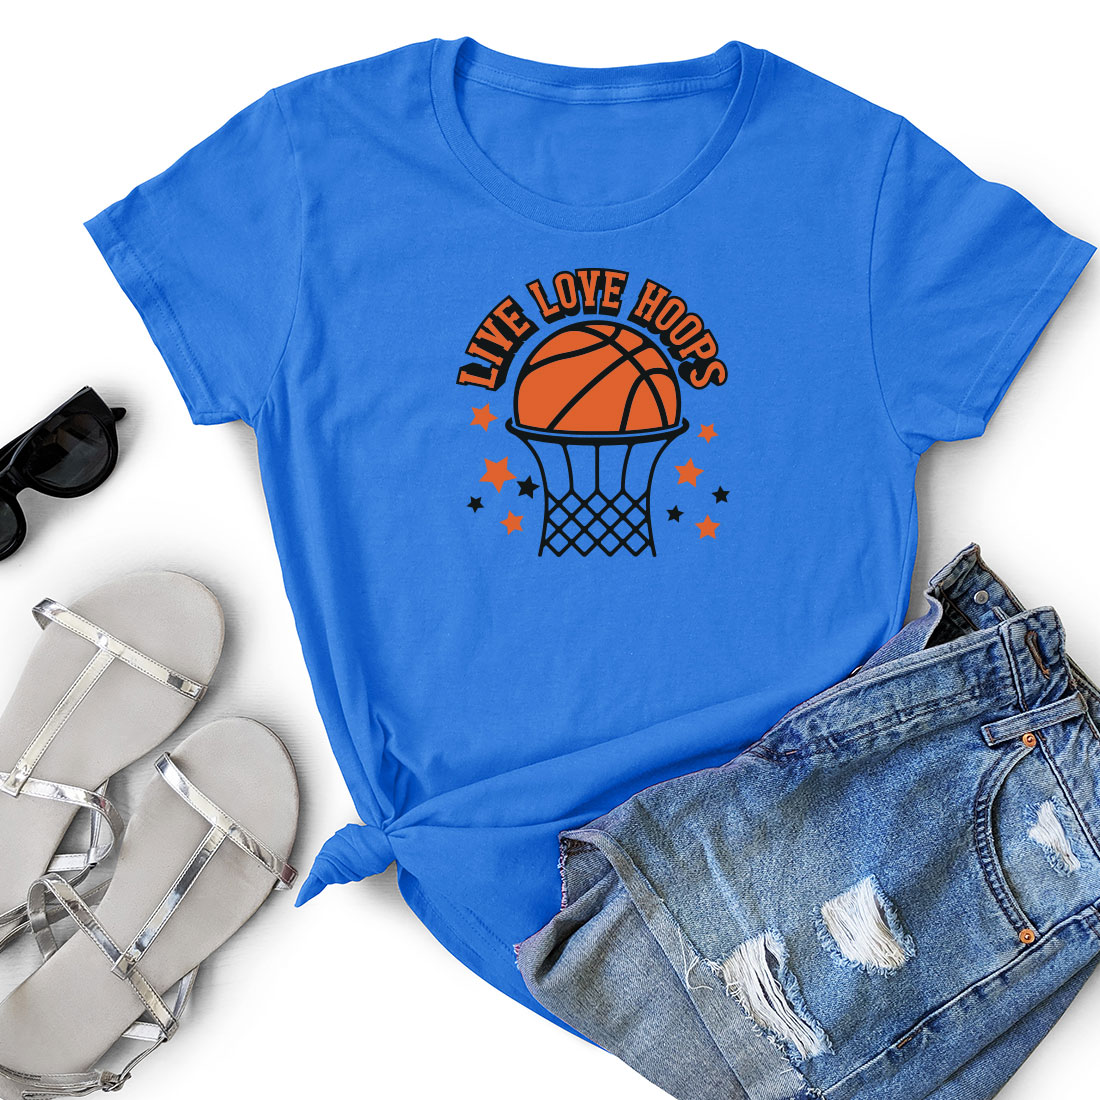 T - shirt that says live love hoops with a basketball in the hoop.